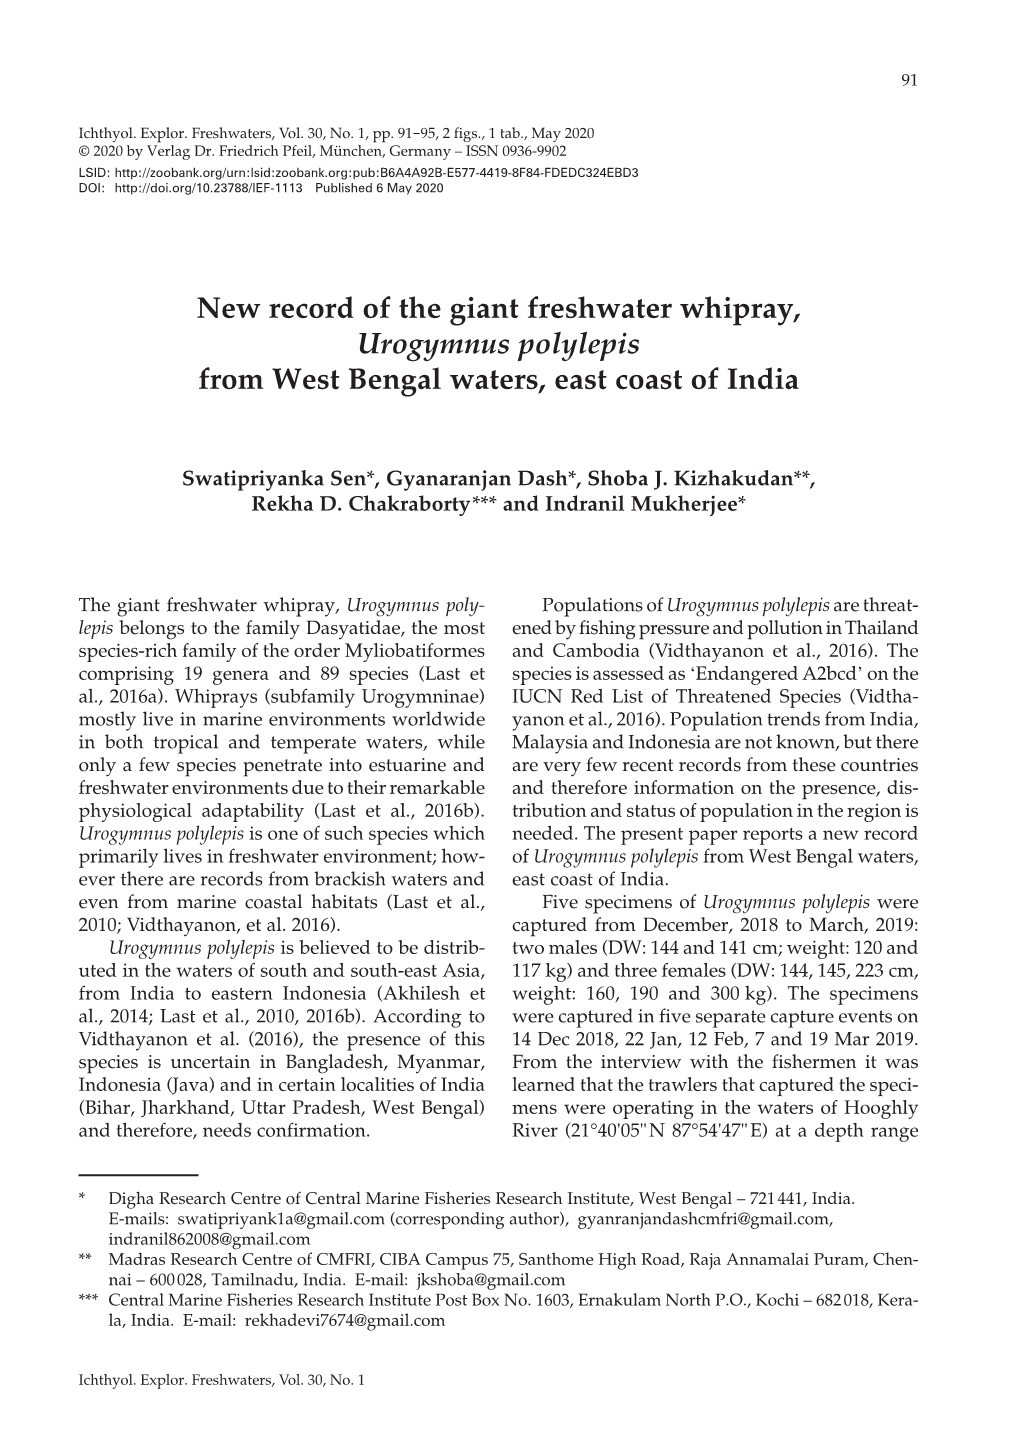 New Record of the Giant Freshwater Whipray, Urogymnus Polylepis from West Bengal Waters, East Coast of India